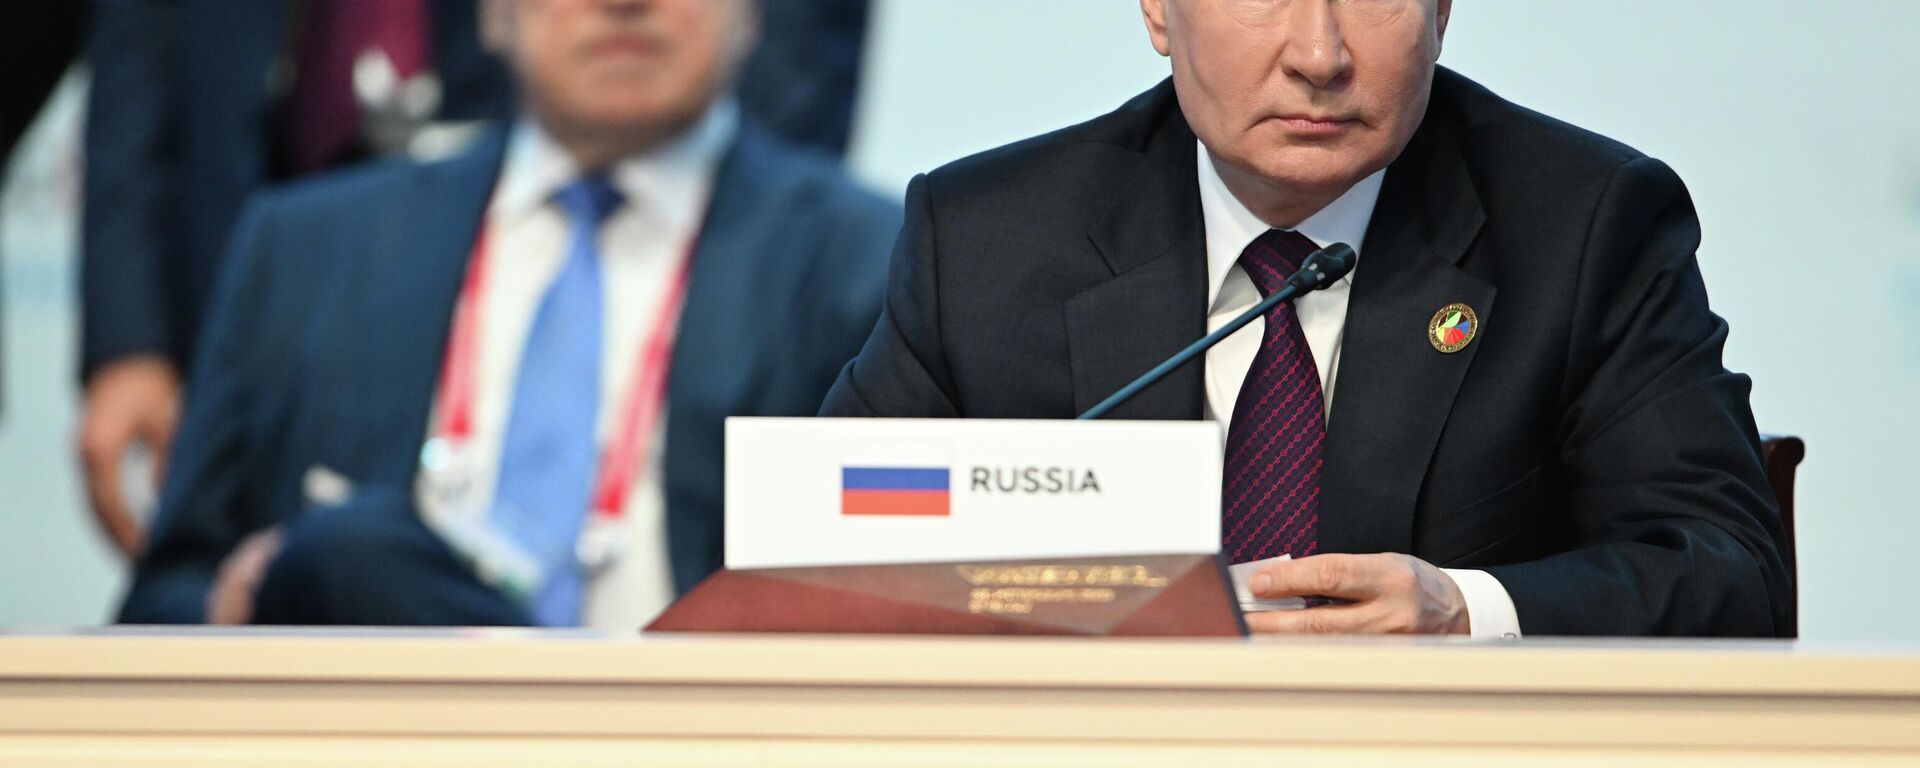 Russian President Vladimir Putin at the plenary session of the second Russia-Africa Summit in St. Petersburg, July 28, 2023 - Sputnik Africa, 1920, 28.07.2023